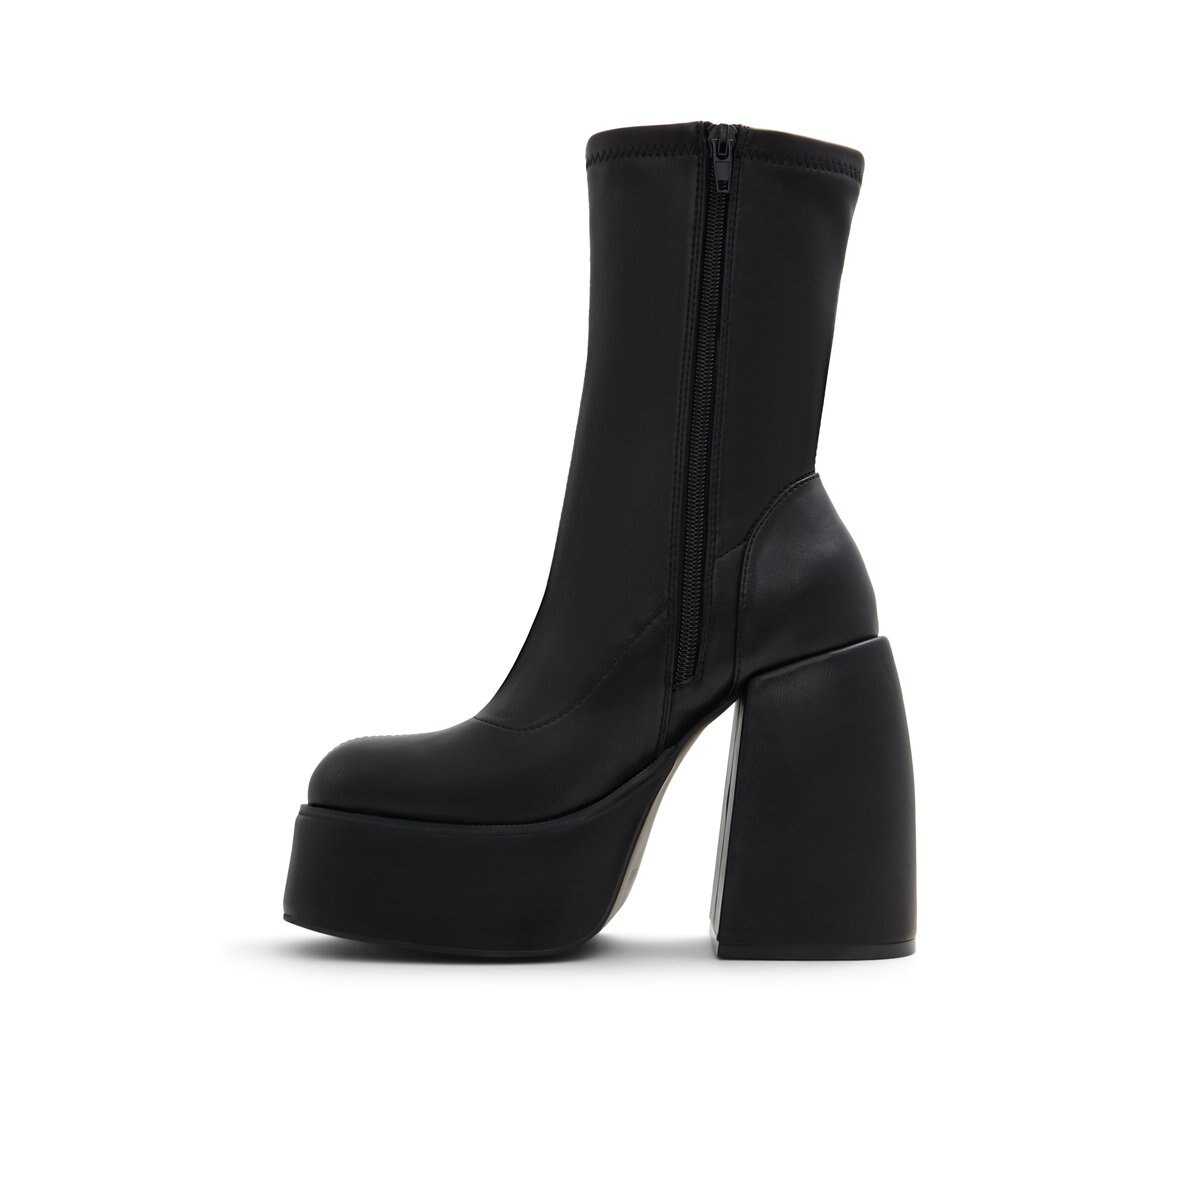 Scarrlet Black Women's Mid-calf Boots | Call It Spring Canada